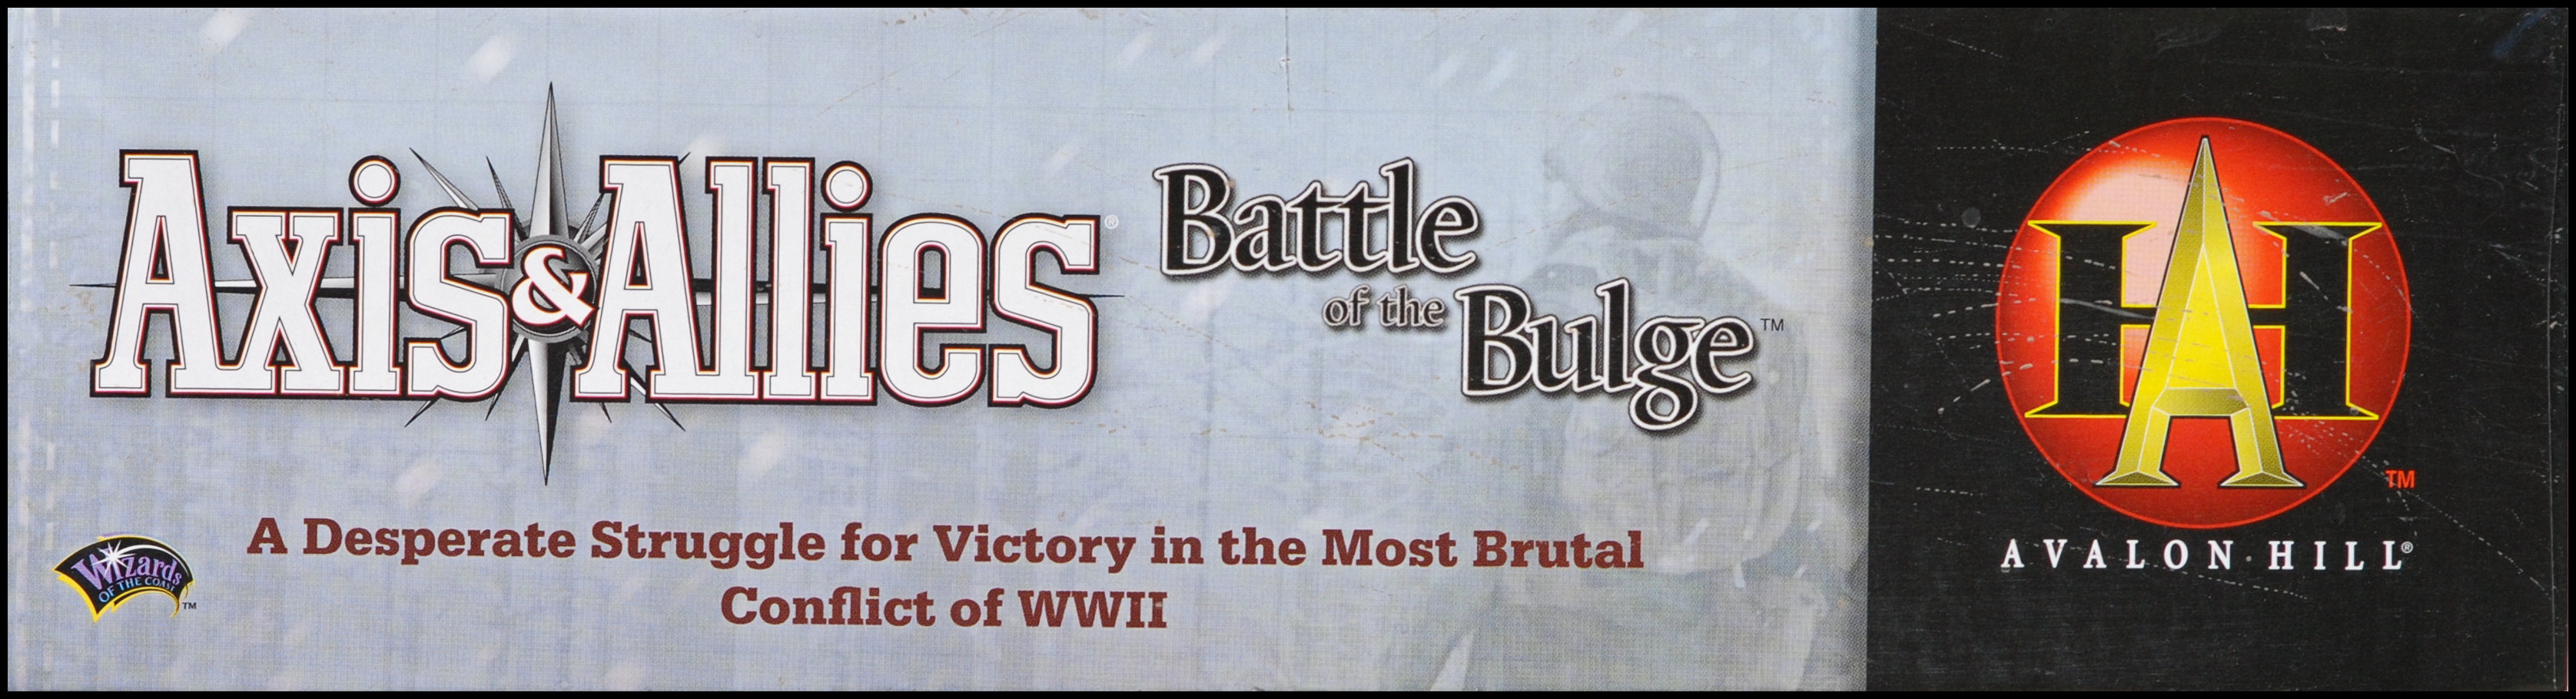 Axis & Allies: Battle Of The Bulge - Outside Box Side 3